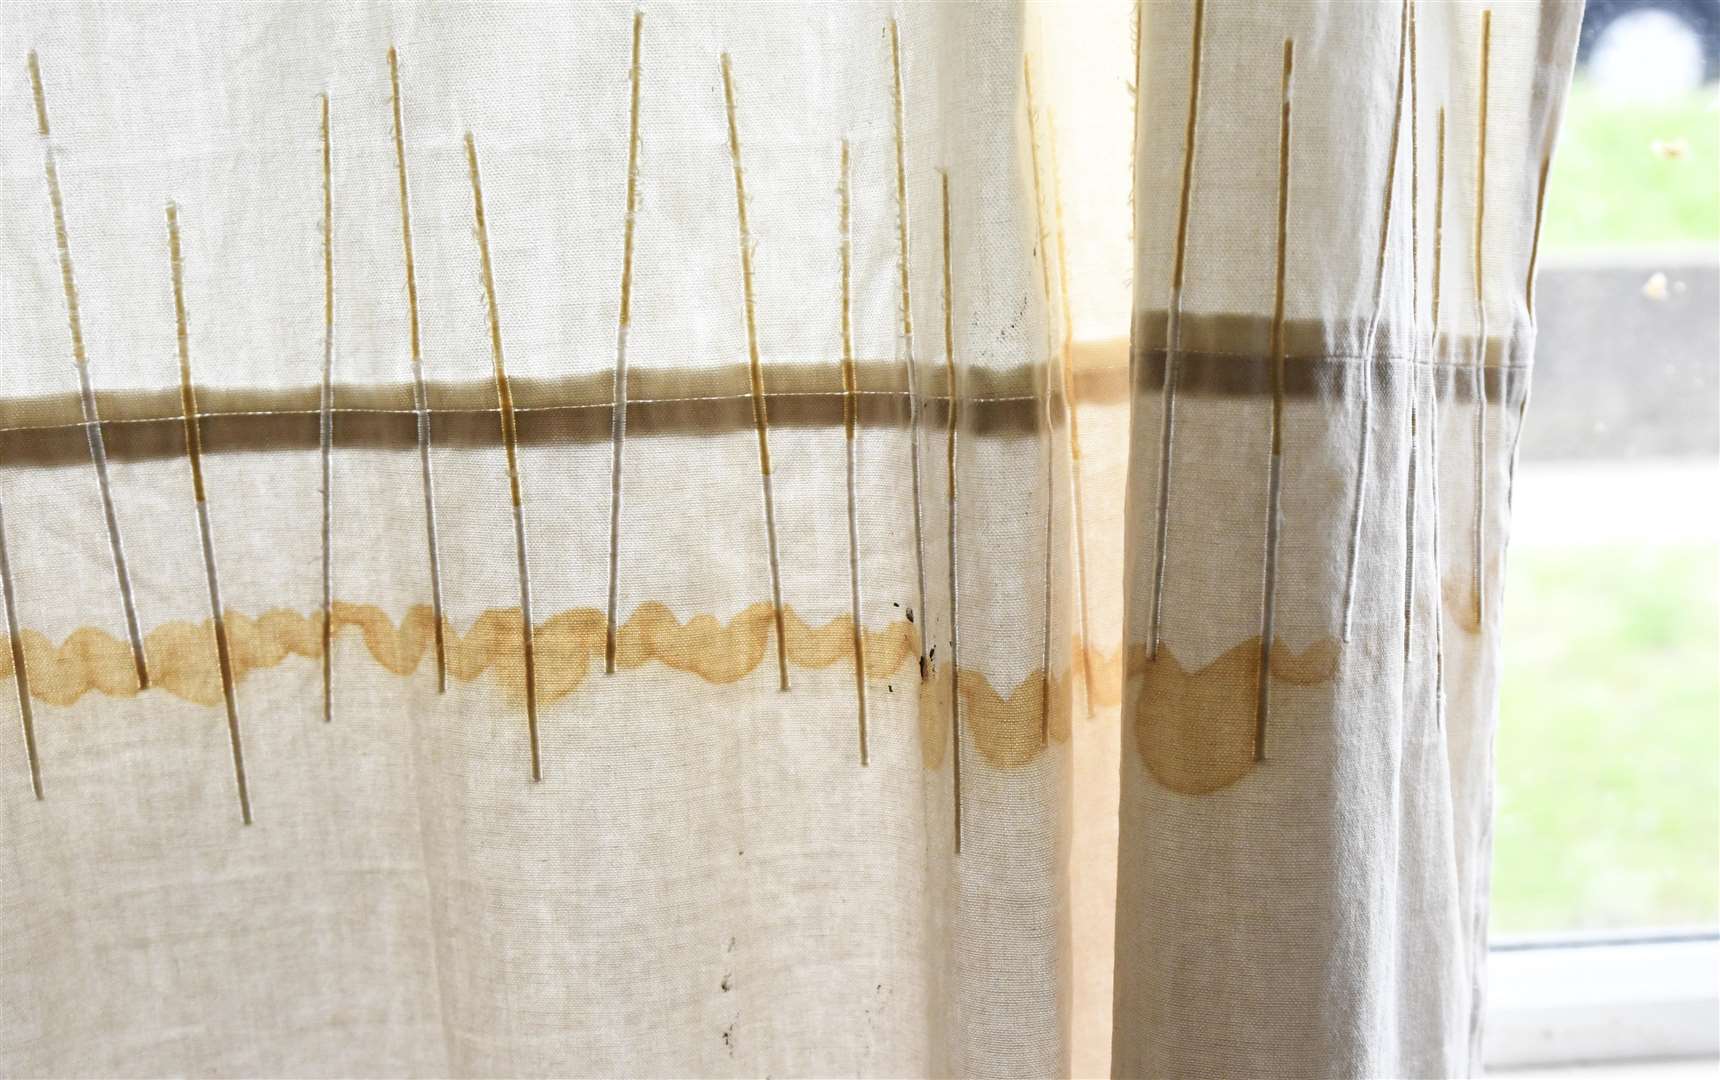 The stain on the curtain shows how high the levels had risen inside one of the flats affected